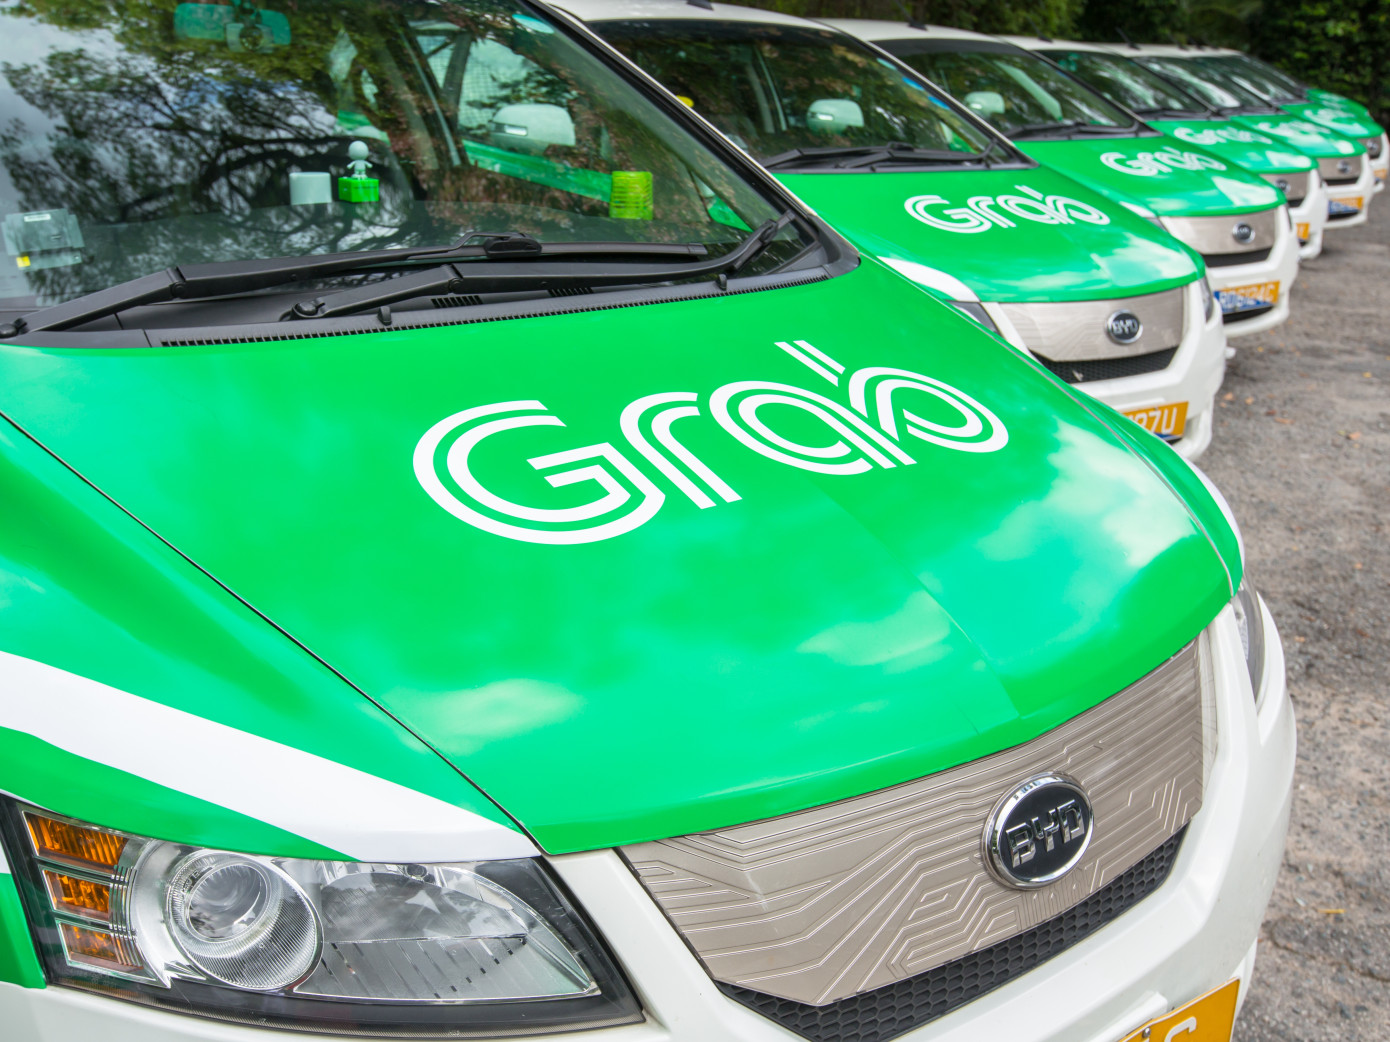 Grab Vietnam managing director on new car-hailing regulations, impact from COVID-19